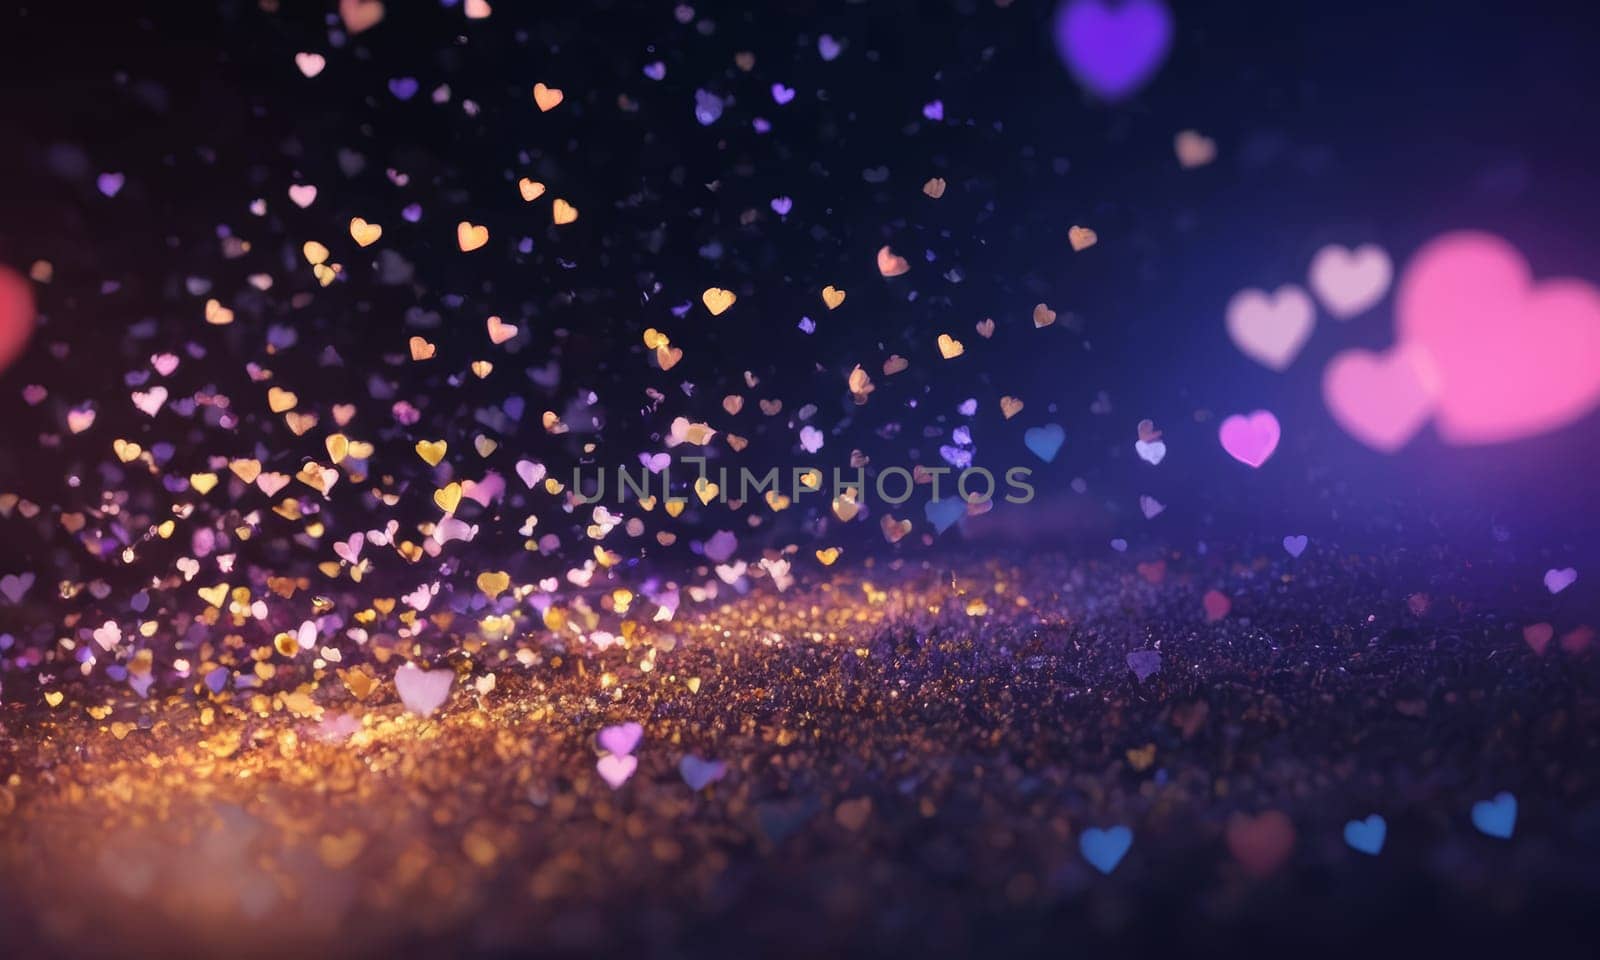 Sparkling heart in a magical atmosphere by Andre1ns